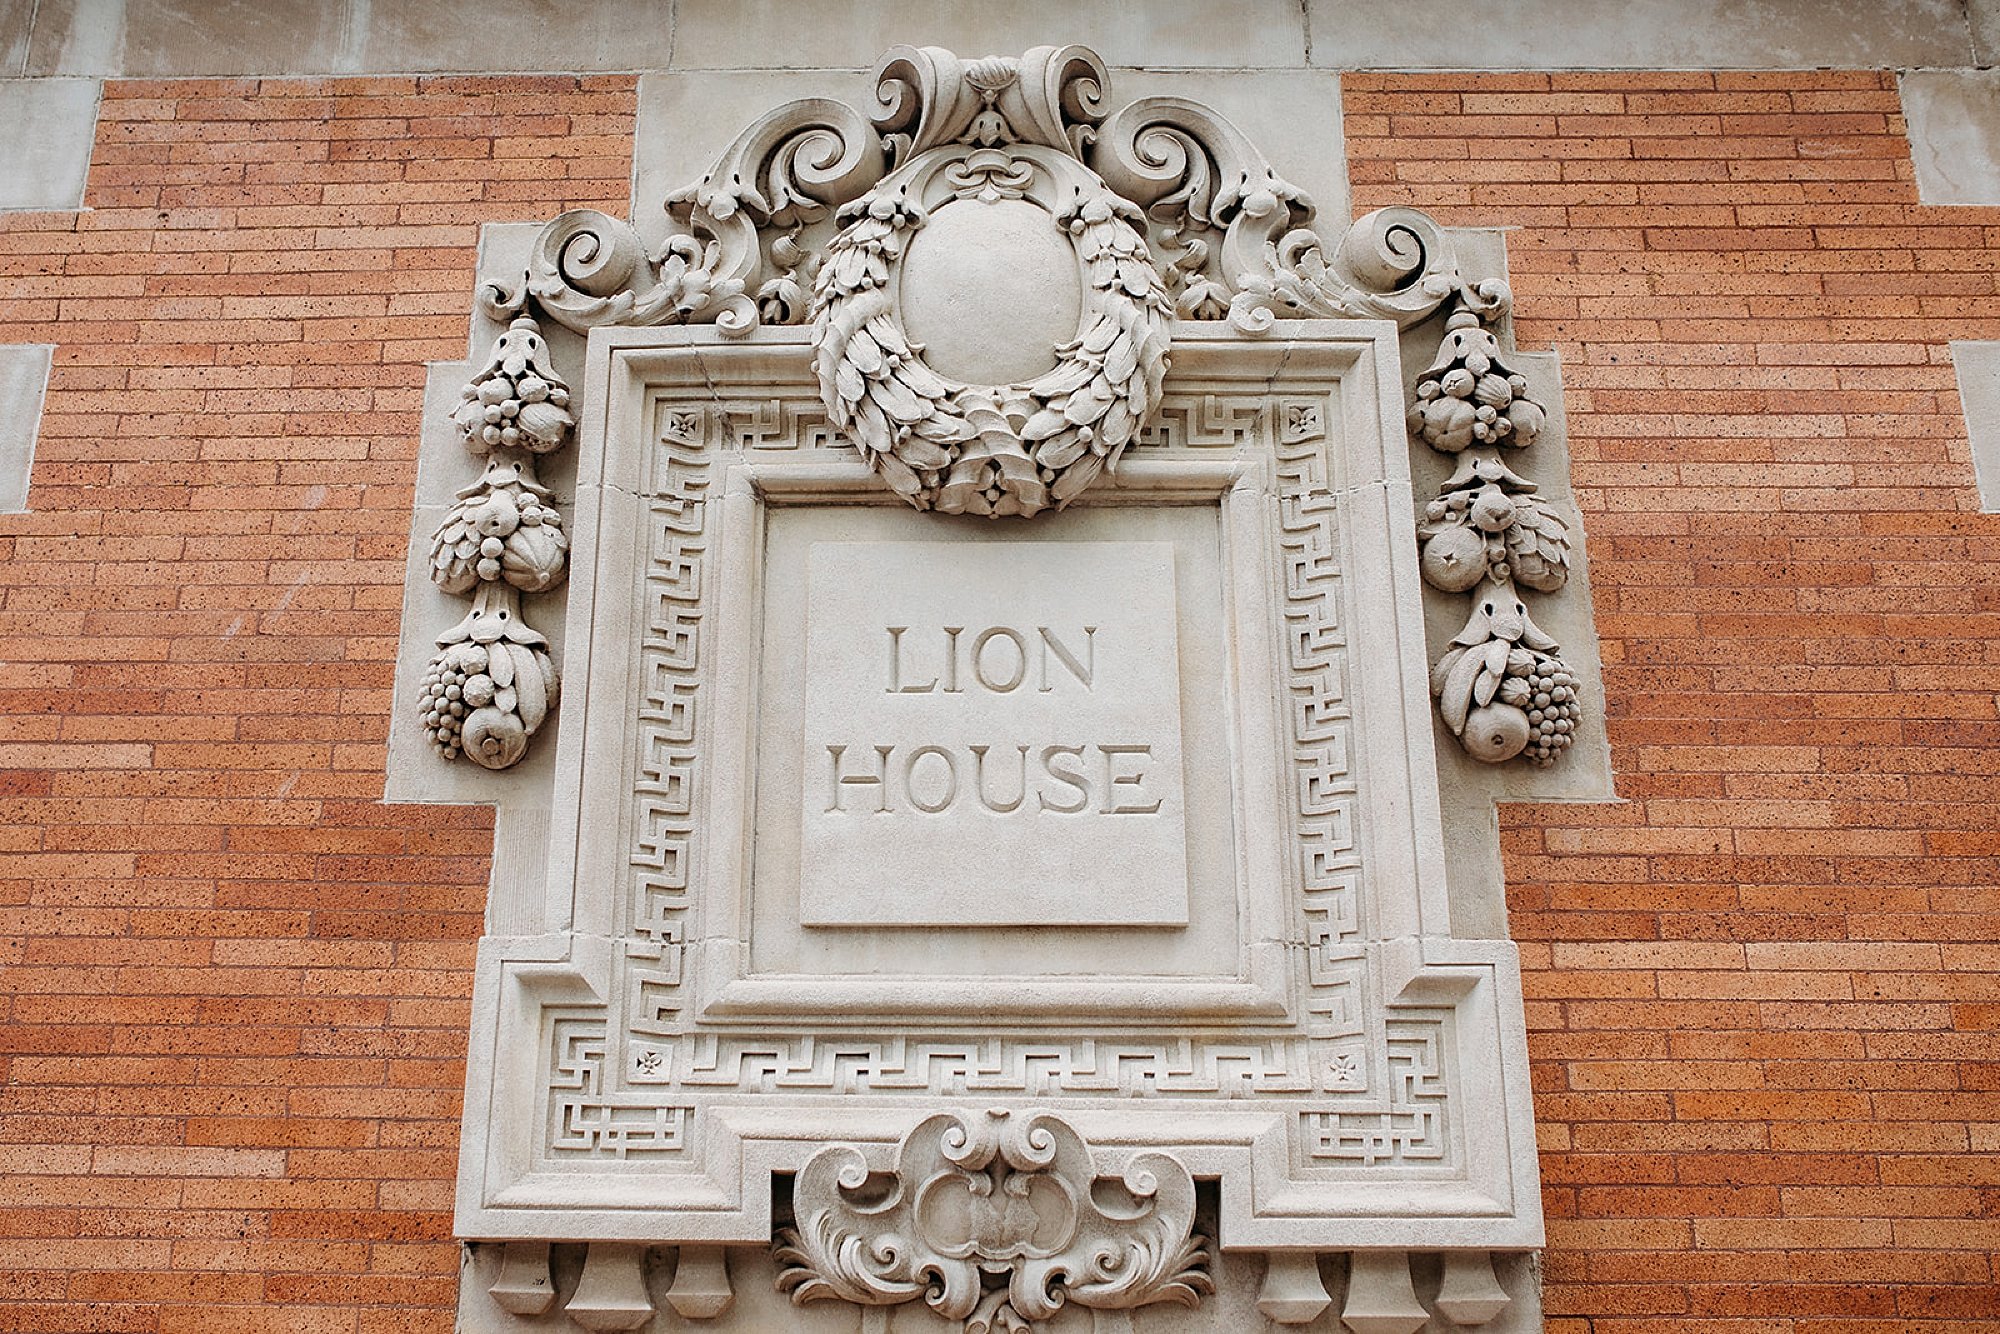 Lion House sign at Bronx Zoo